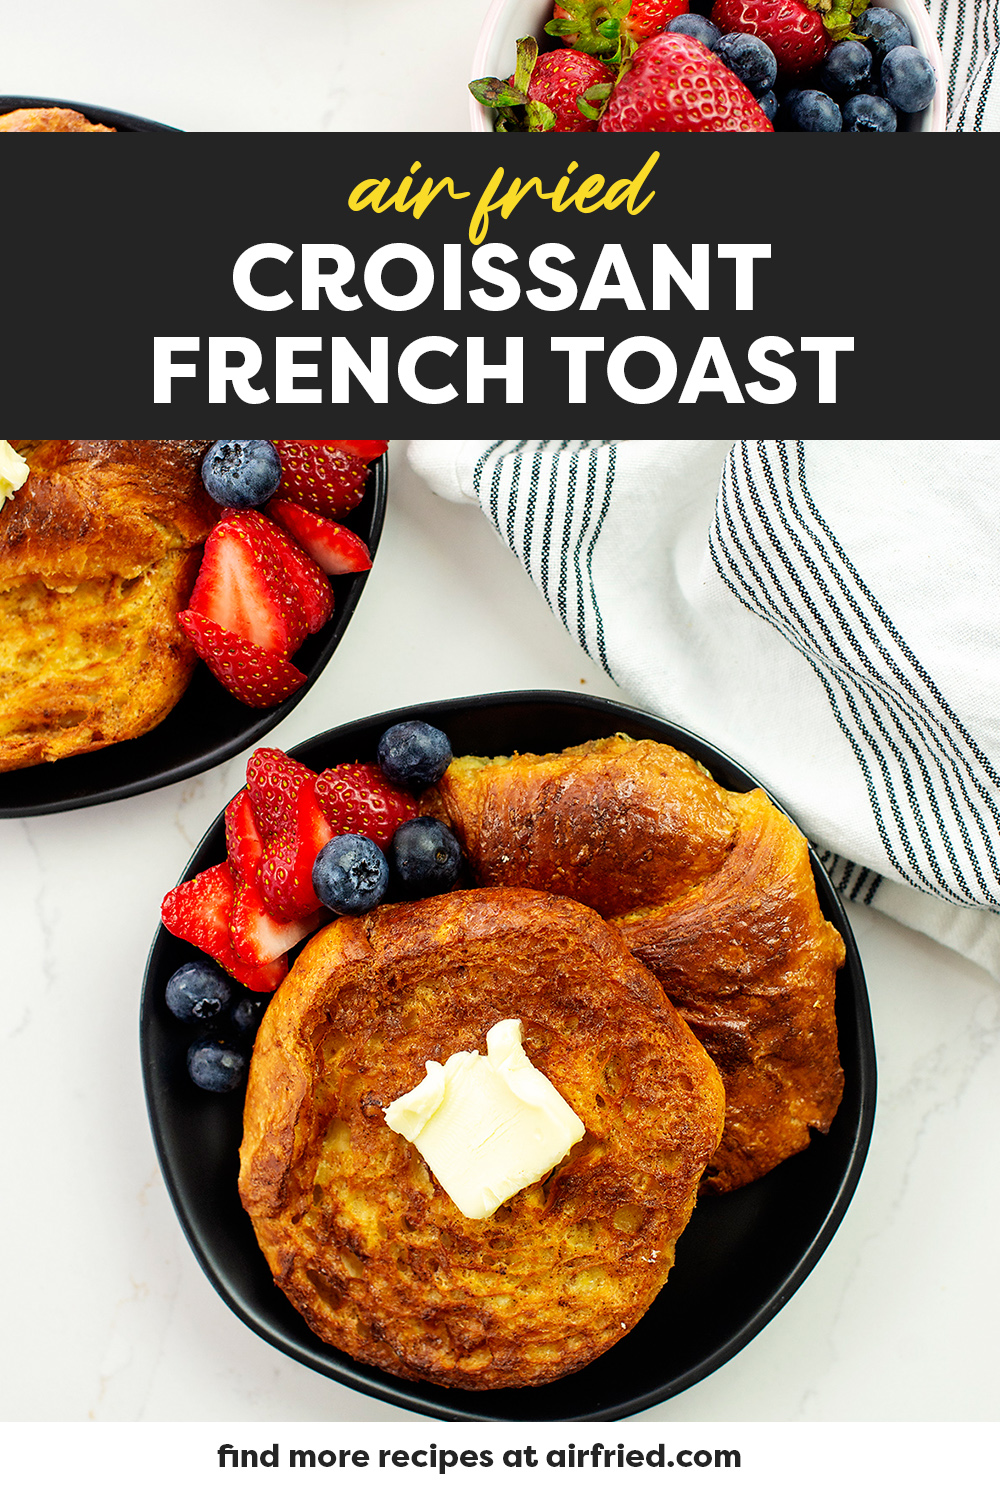 Croissant French toast and fruit on a black plate.